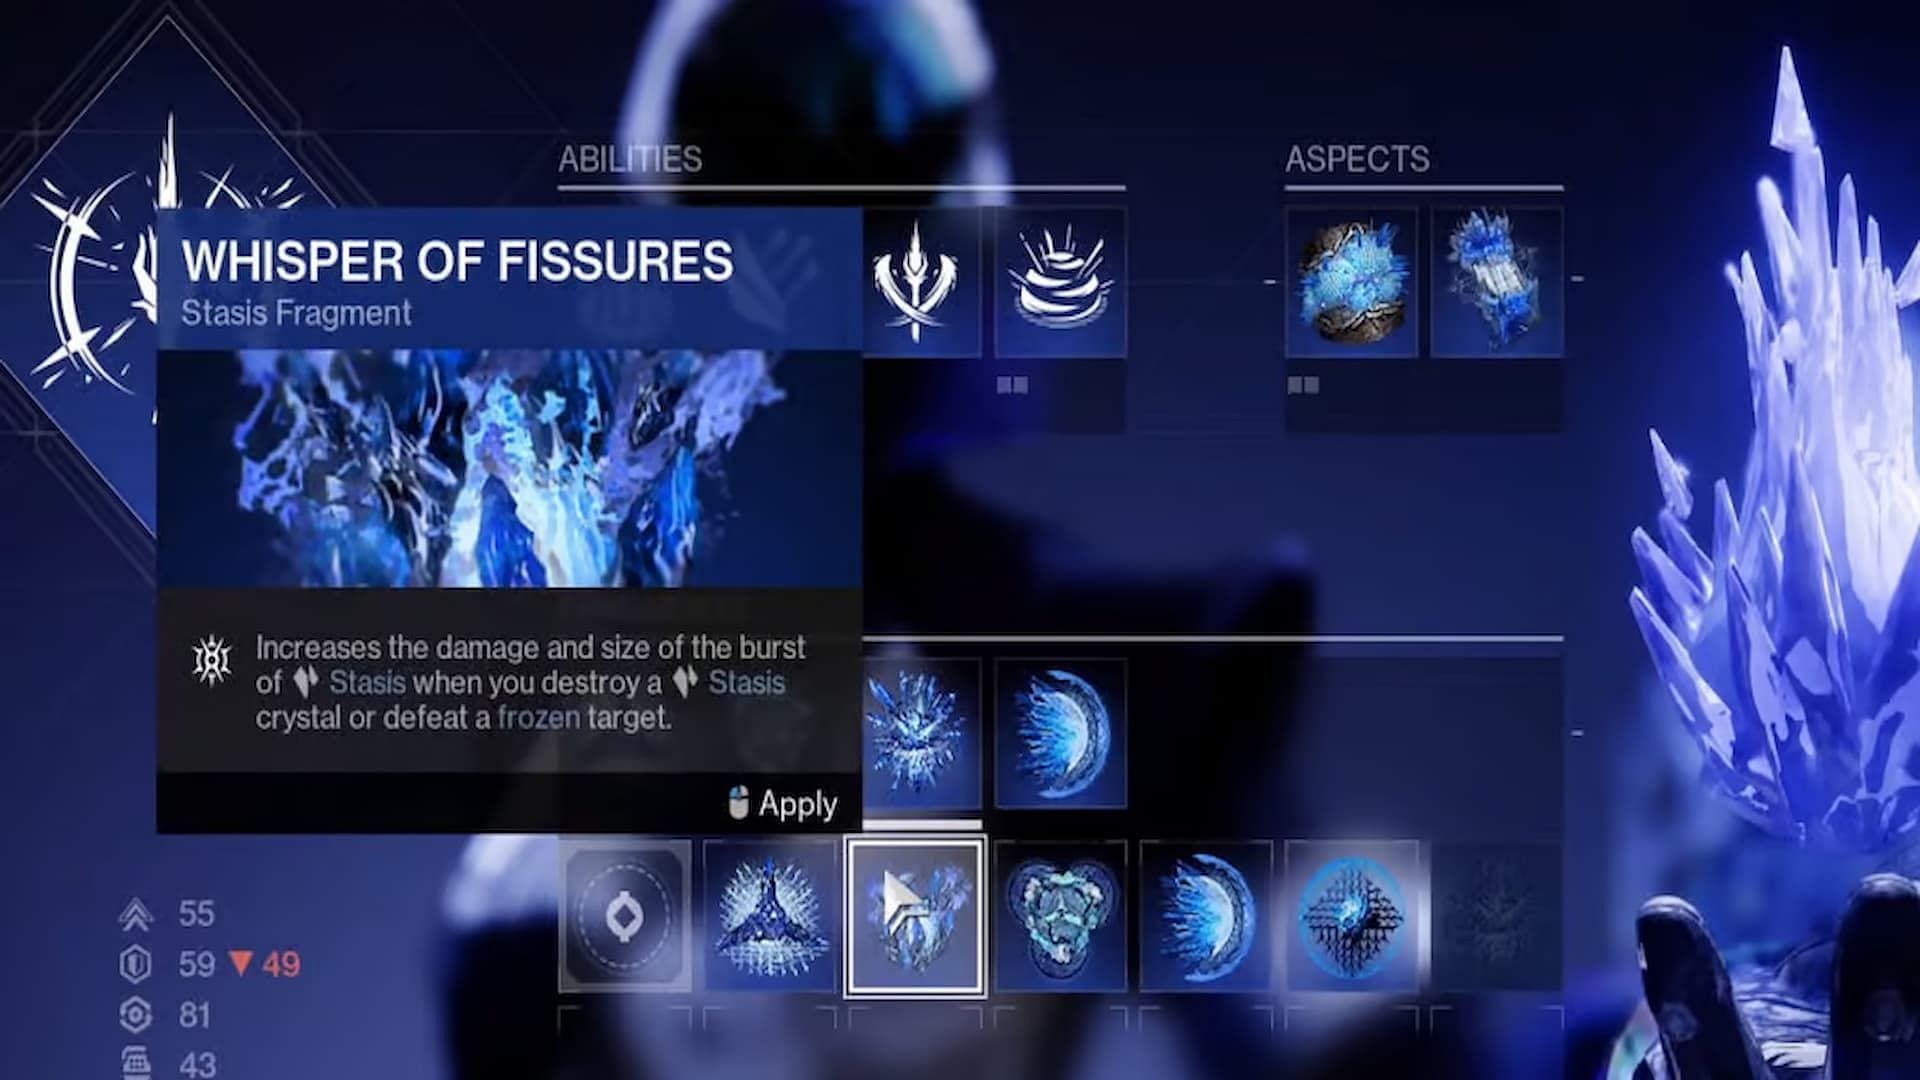 The Whisper of Fissures is a great stasis fragment for both PvP and PvE (Image via Bungie)